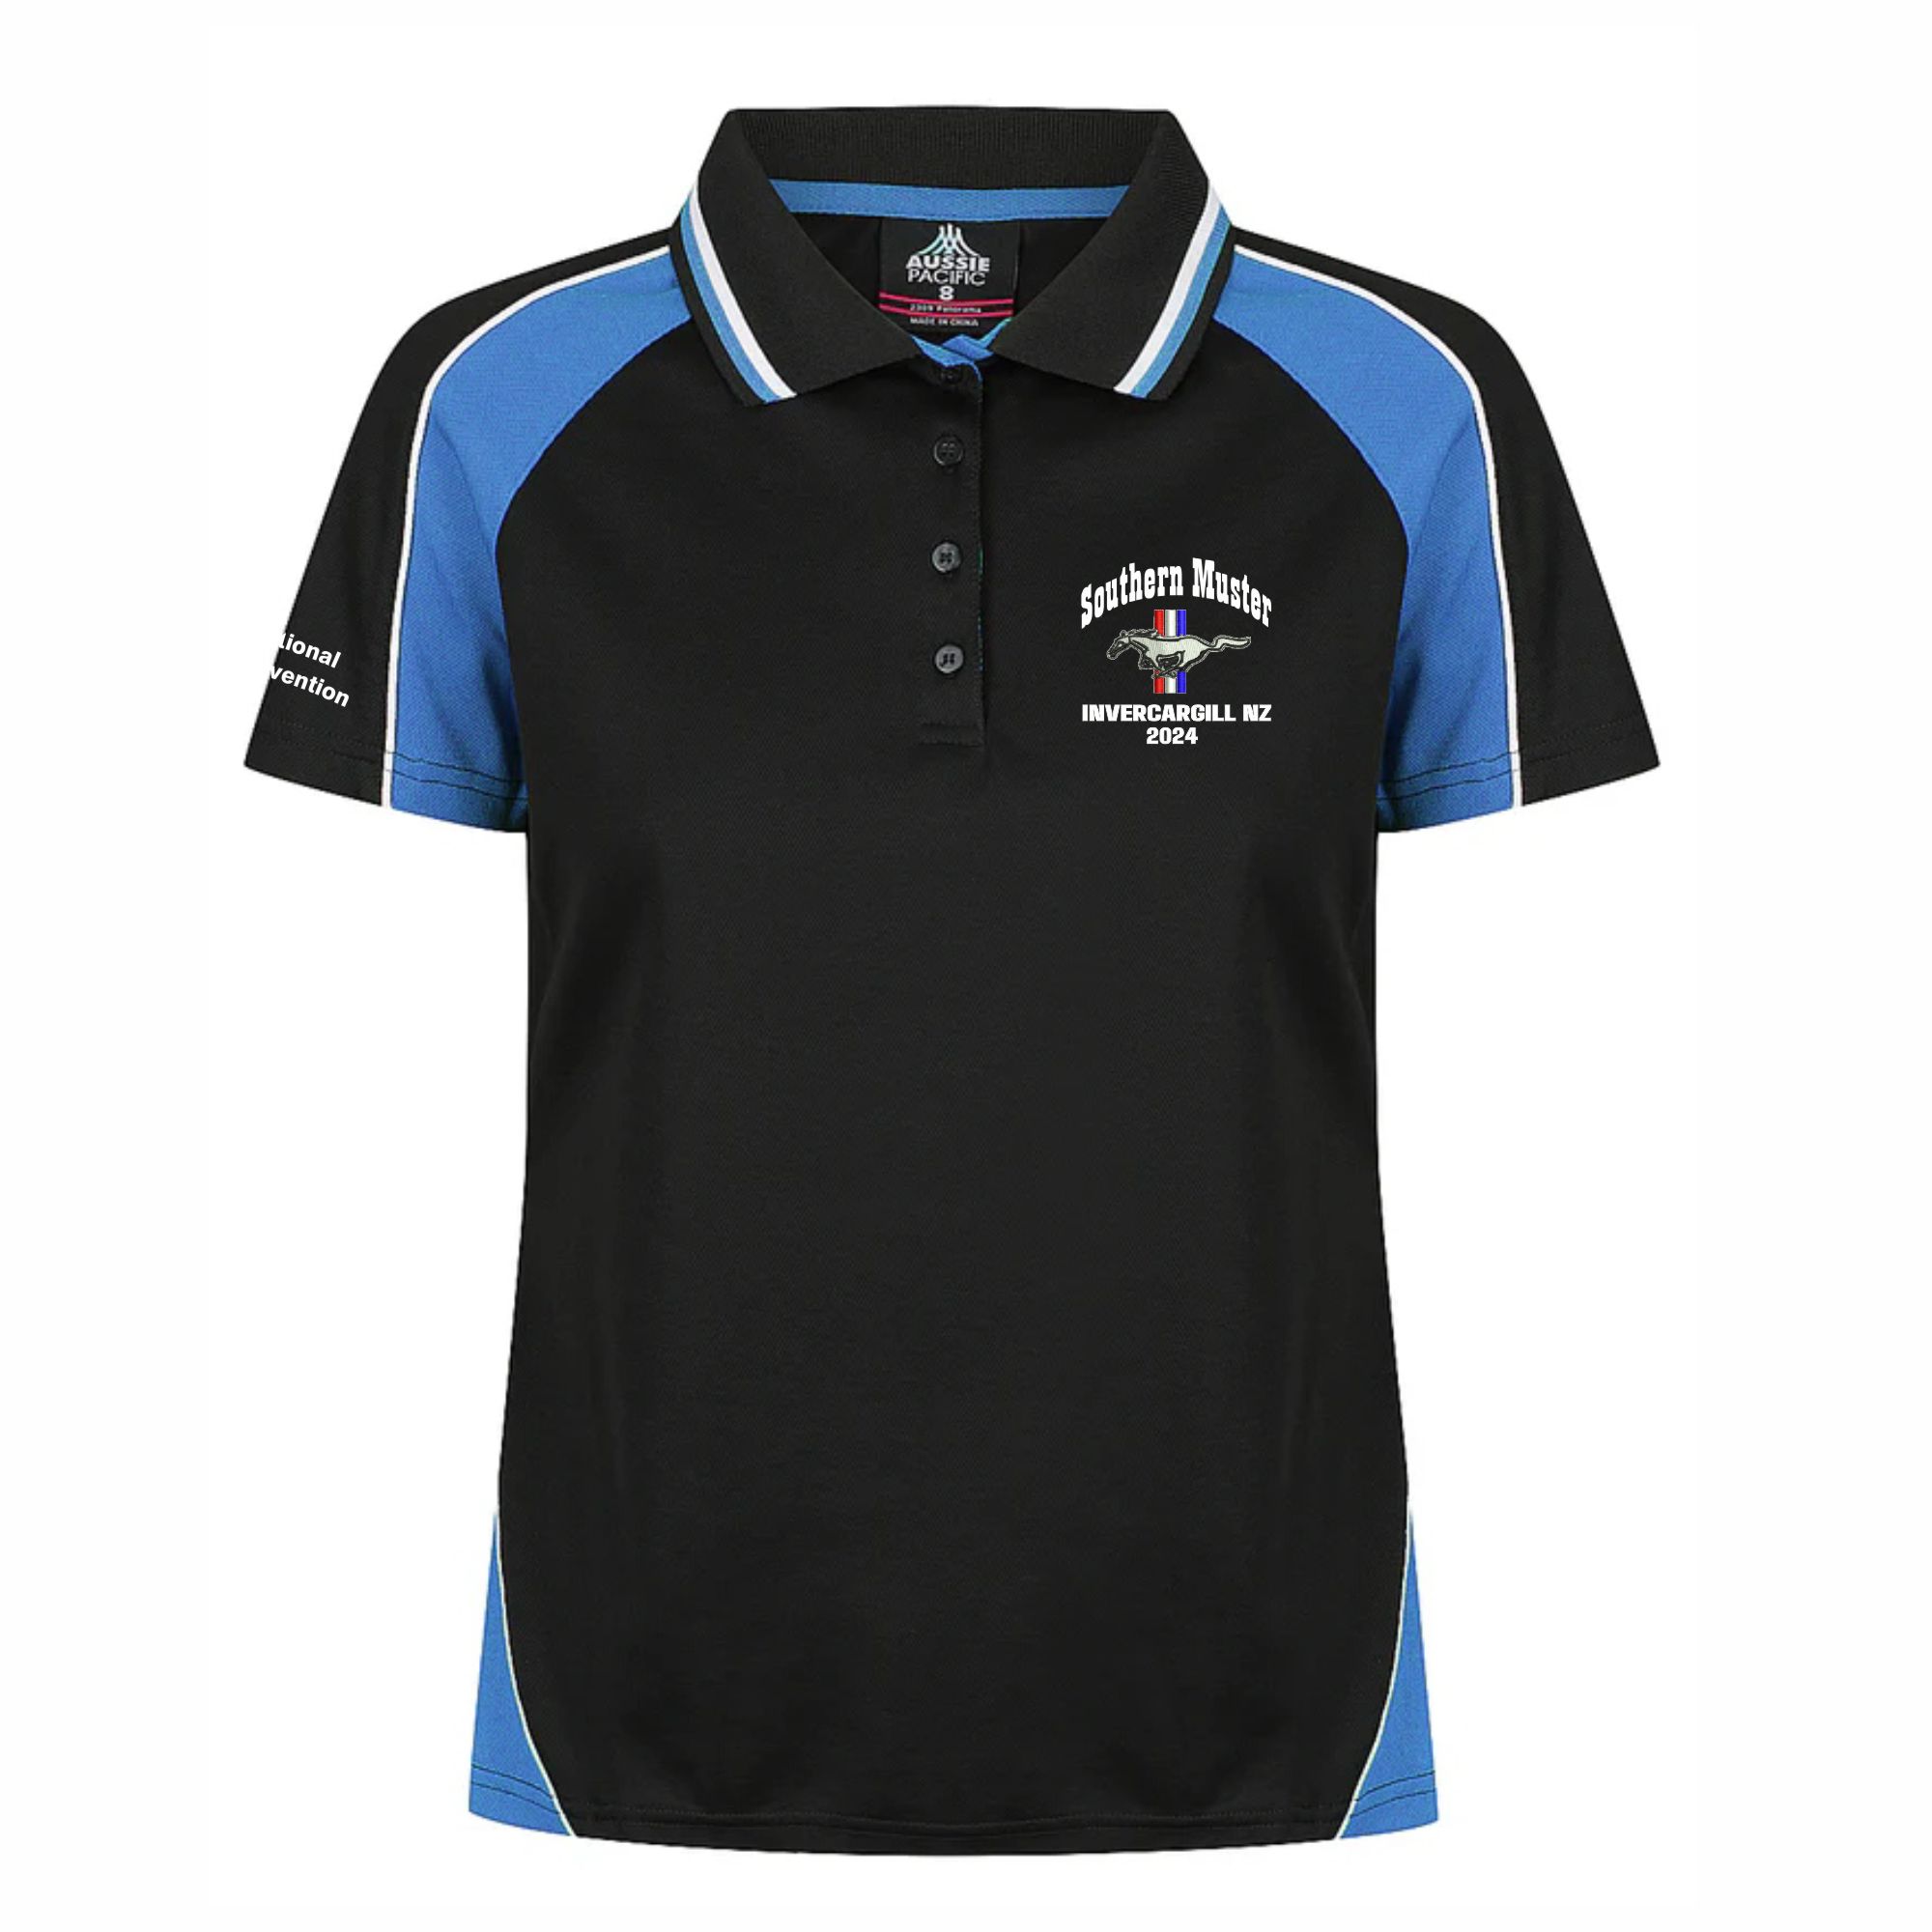 Woman's Polo Shirt Front w/ embroidered event logo